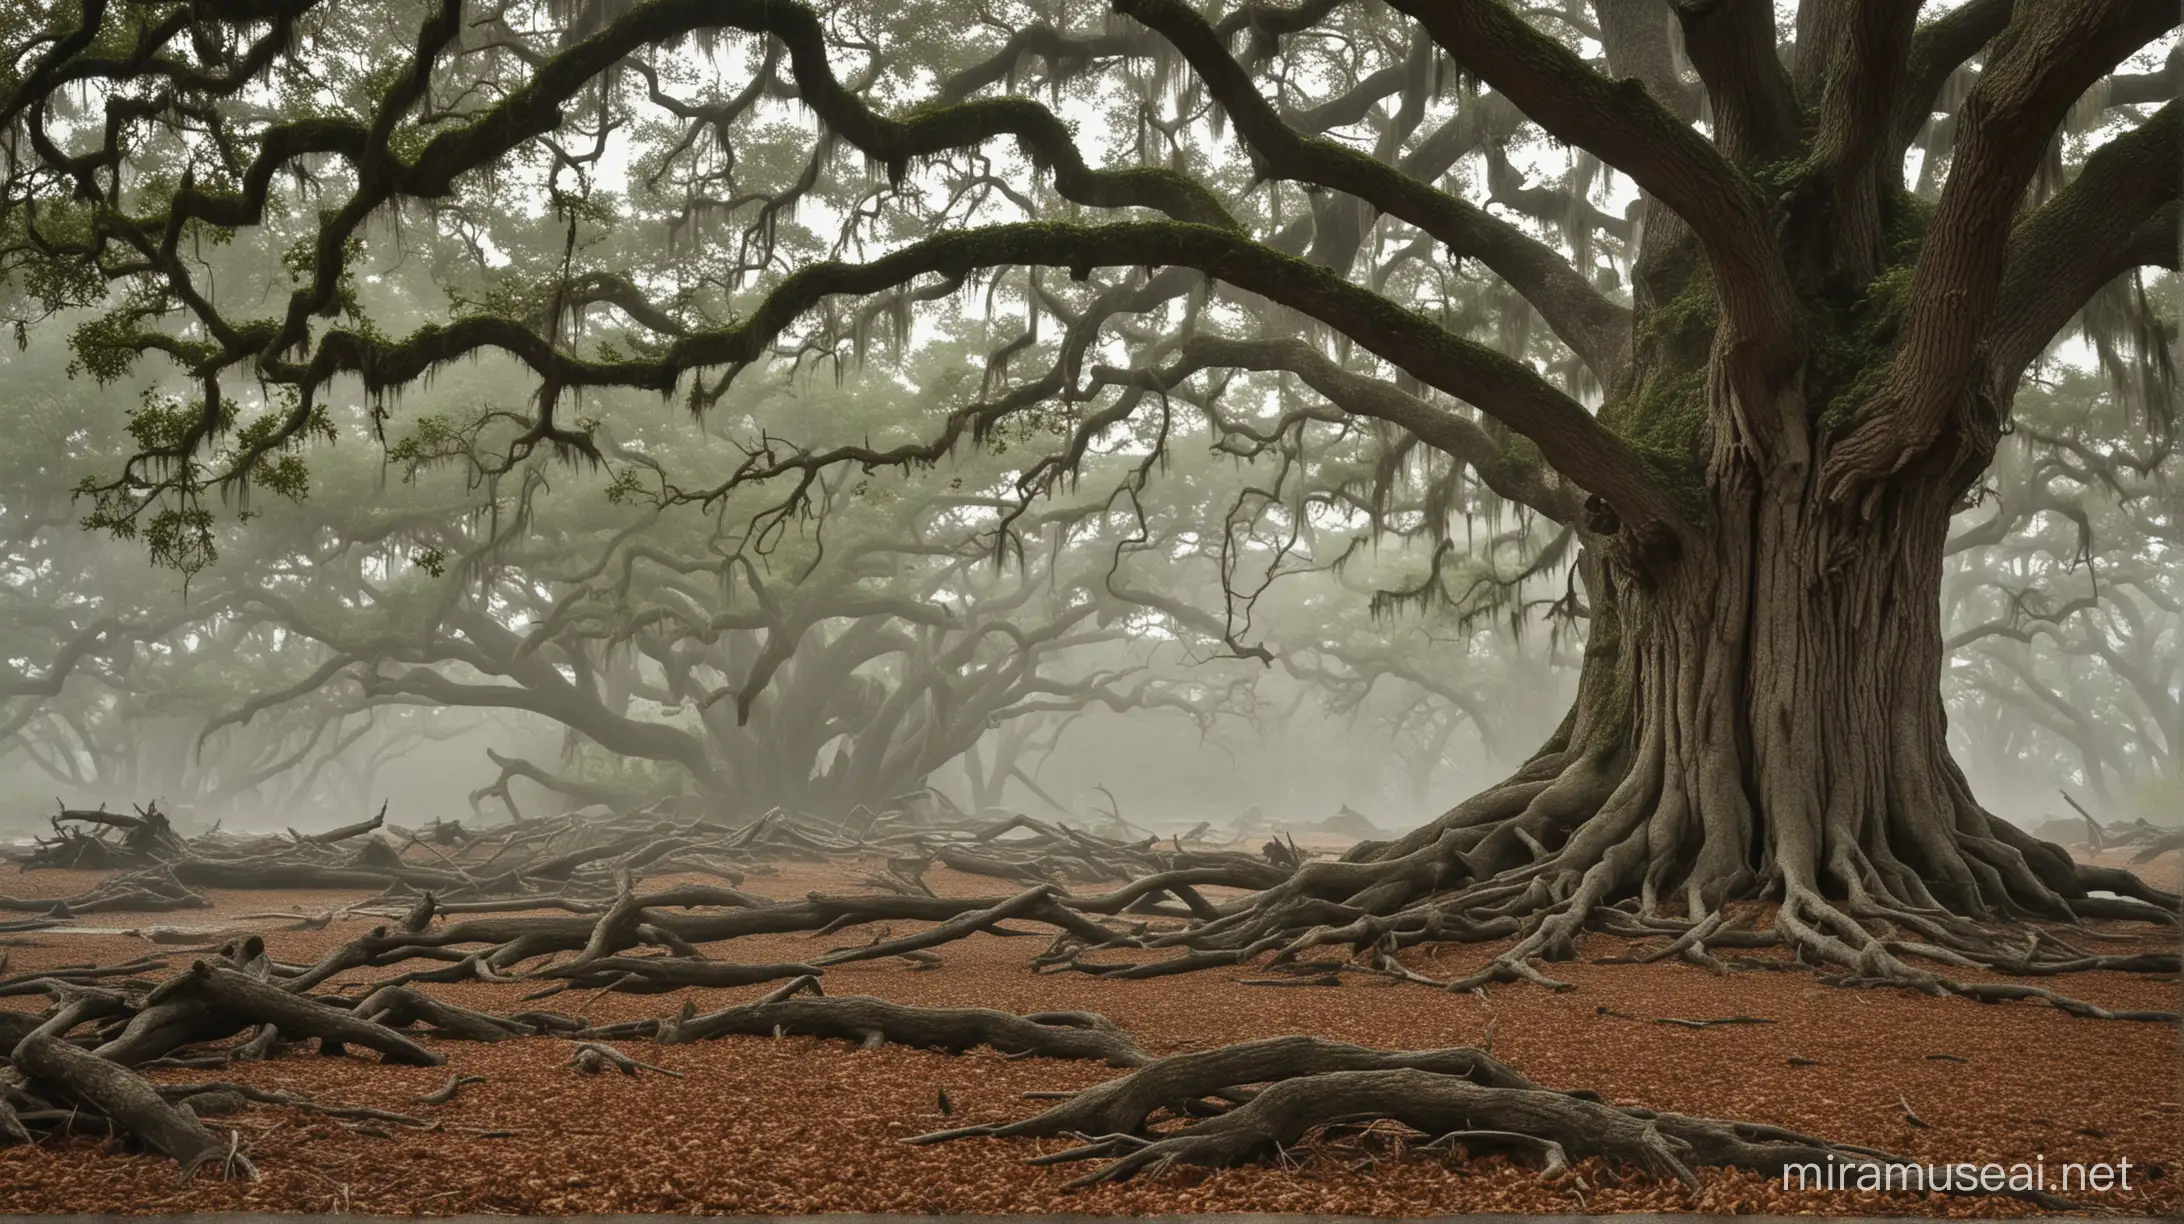 Amidst the whispering winds and ancient oaks, lies a buried secret guarded by time. Capture the mystique of Oak Island's legendary treasure in an evocative image that beckons the imagination to unravel its enigmatic depths."